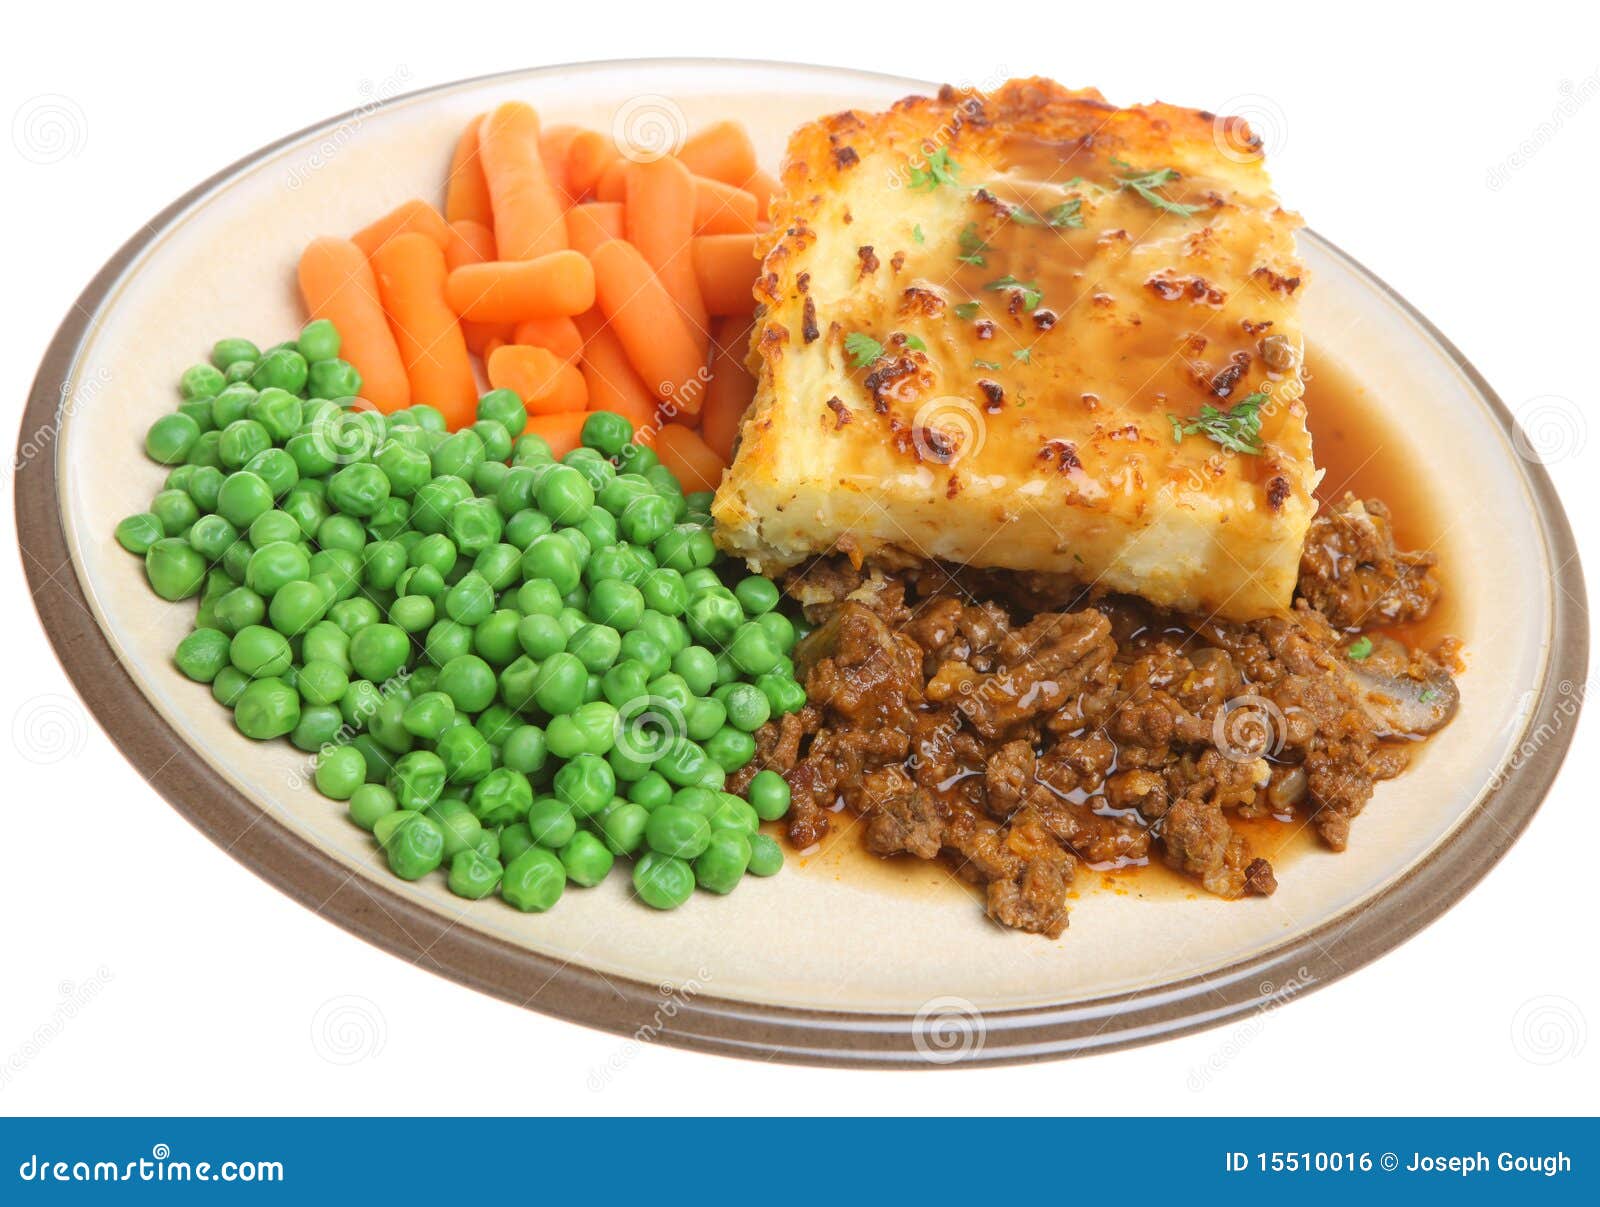 Shepherds Pie With Vegetables Stock Photo Image Of Dinner